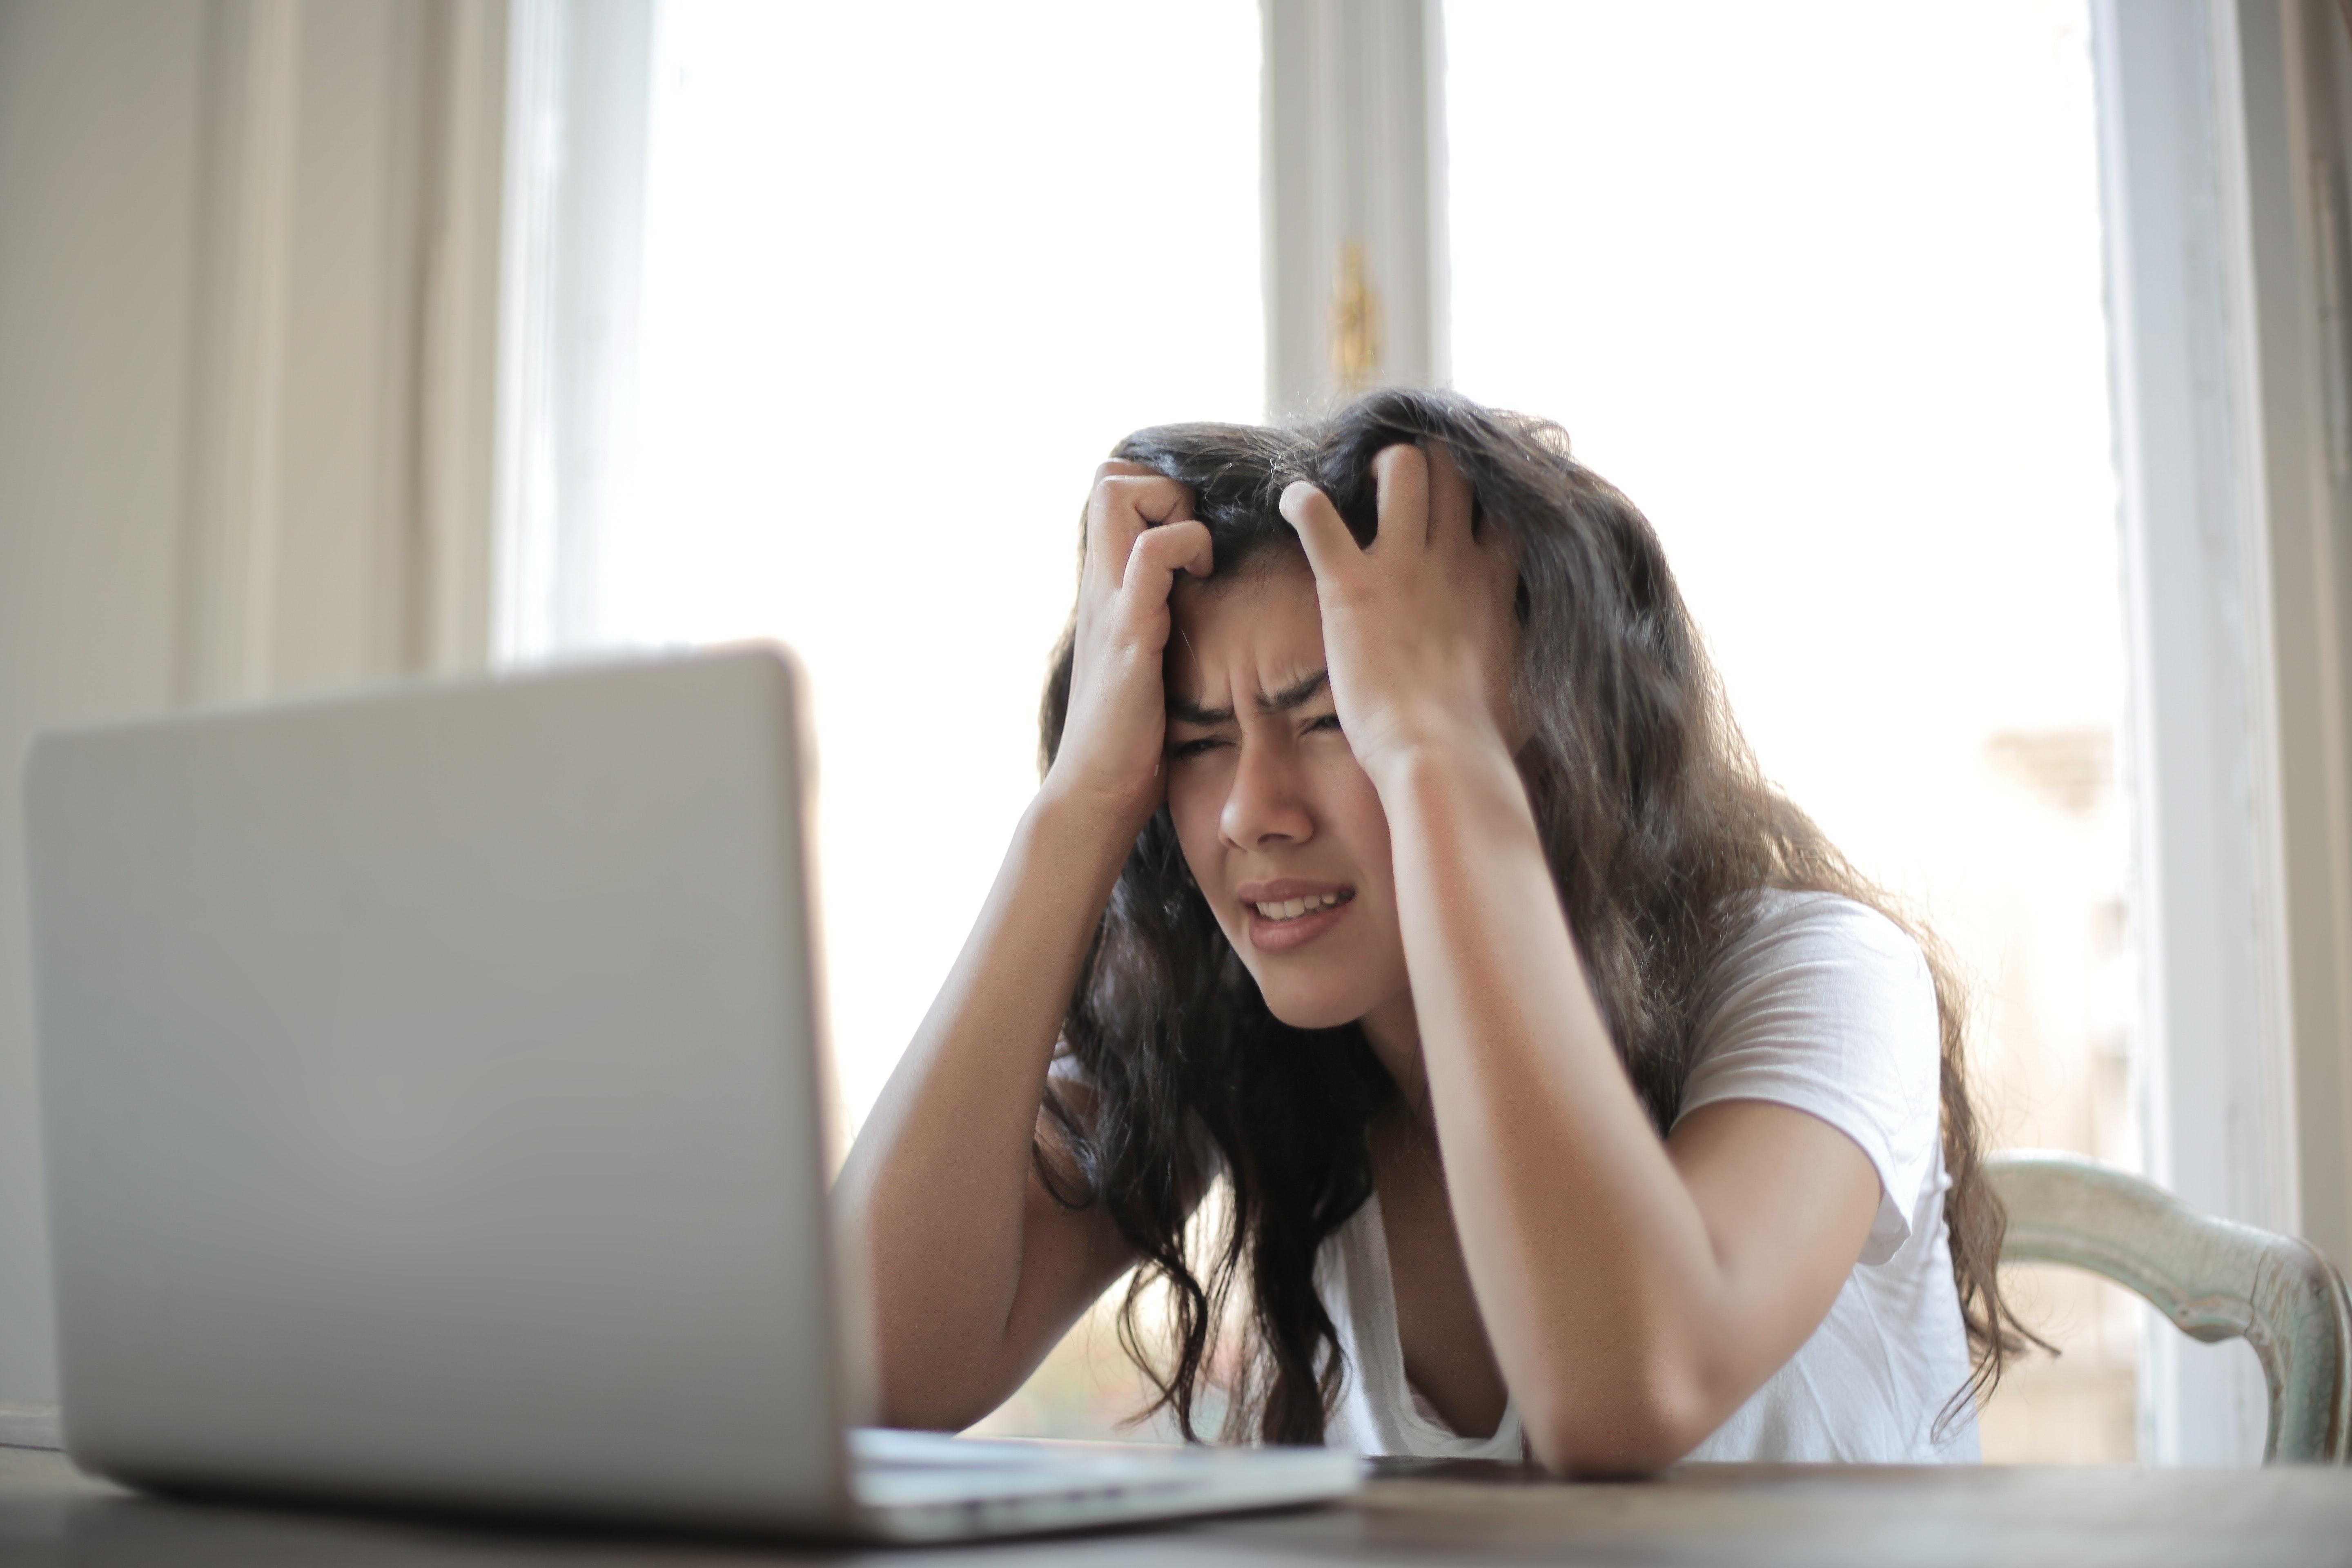 Girl in front of laptop holding her head in her hands